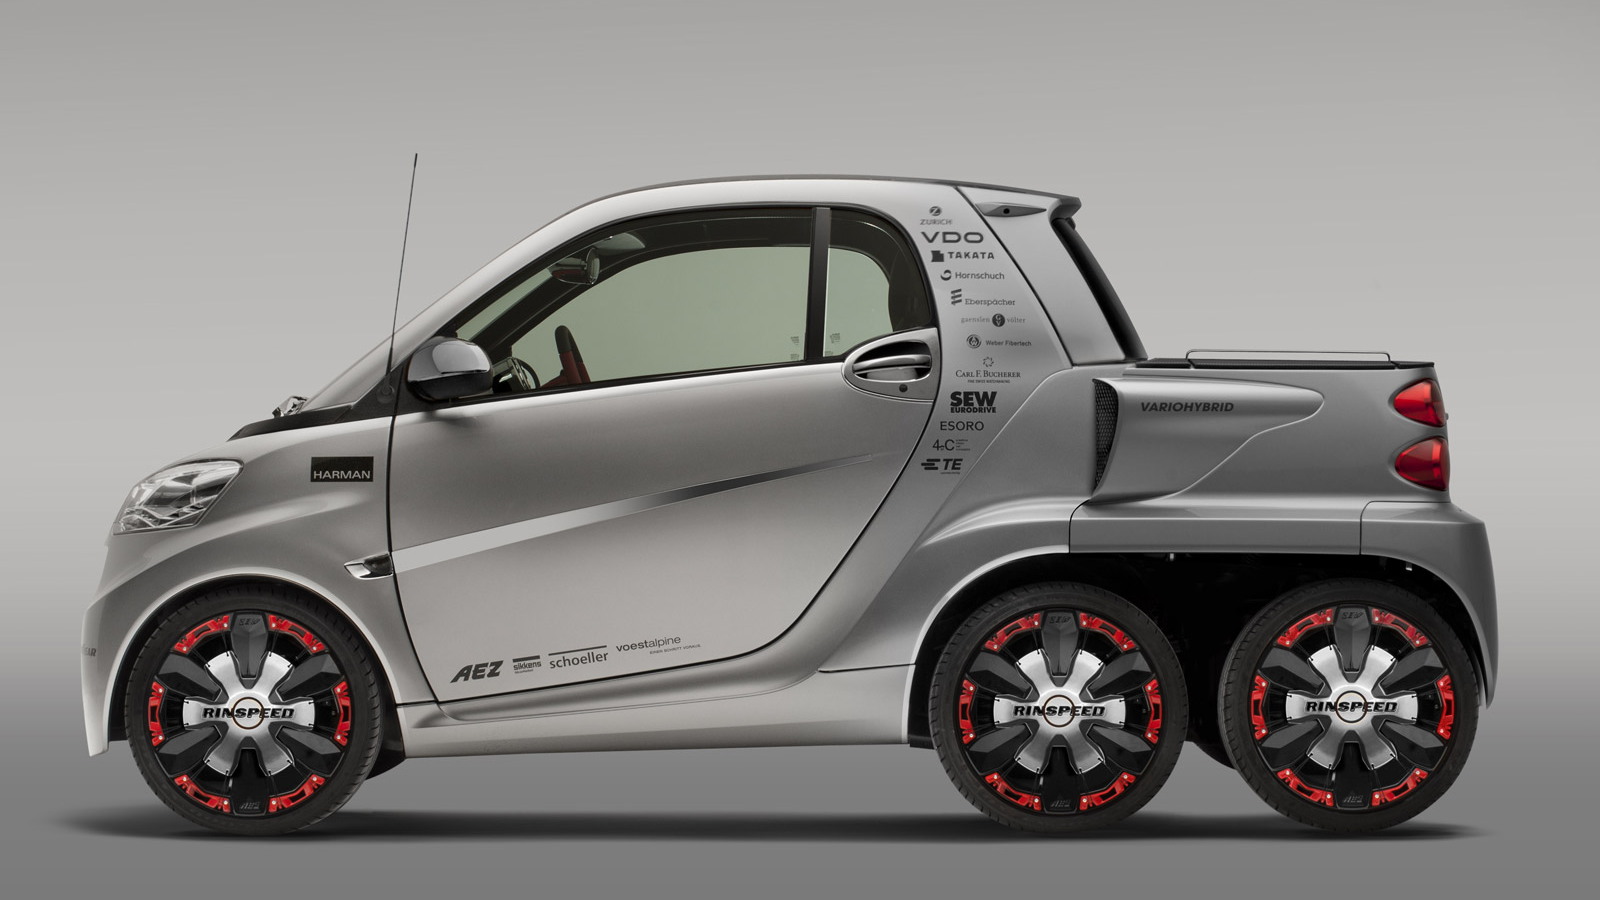 2012 Rinspeed Dock+Go Concept based on the Smart ForTwo